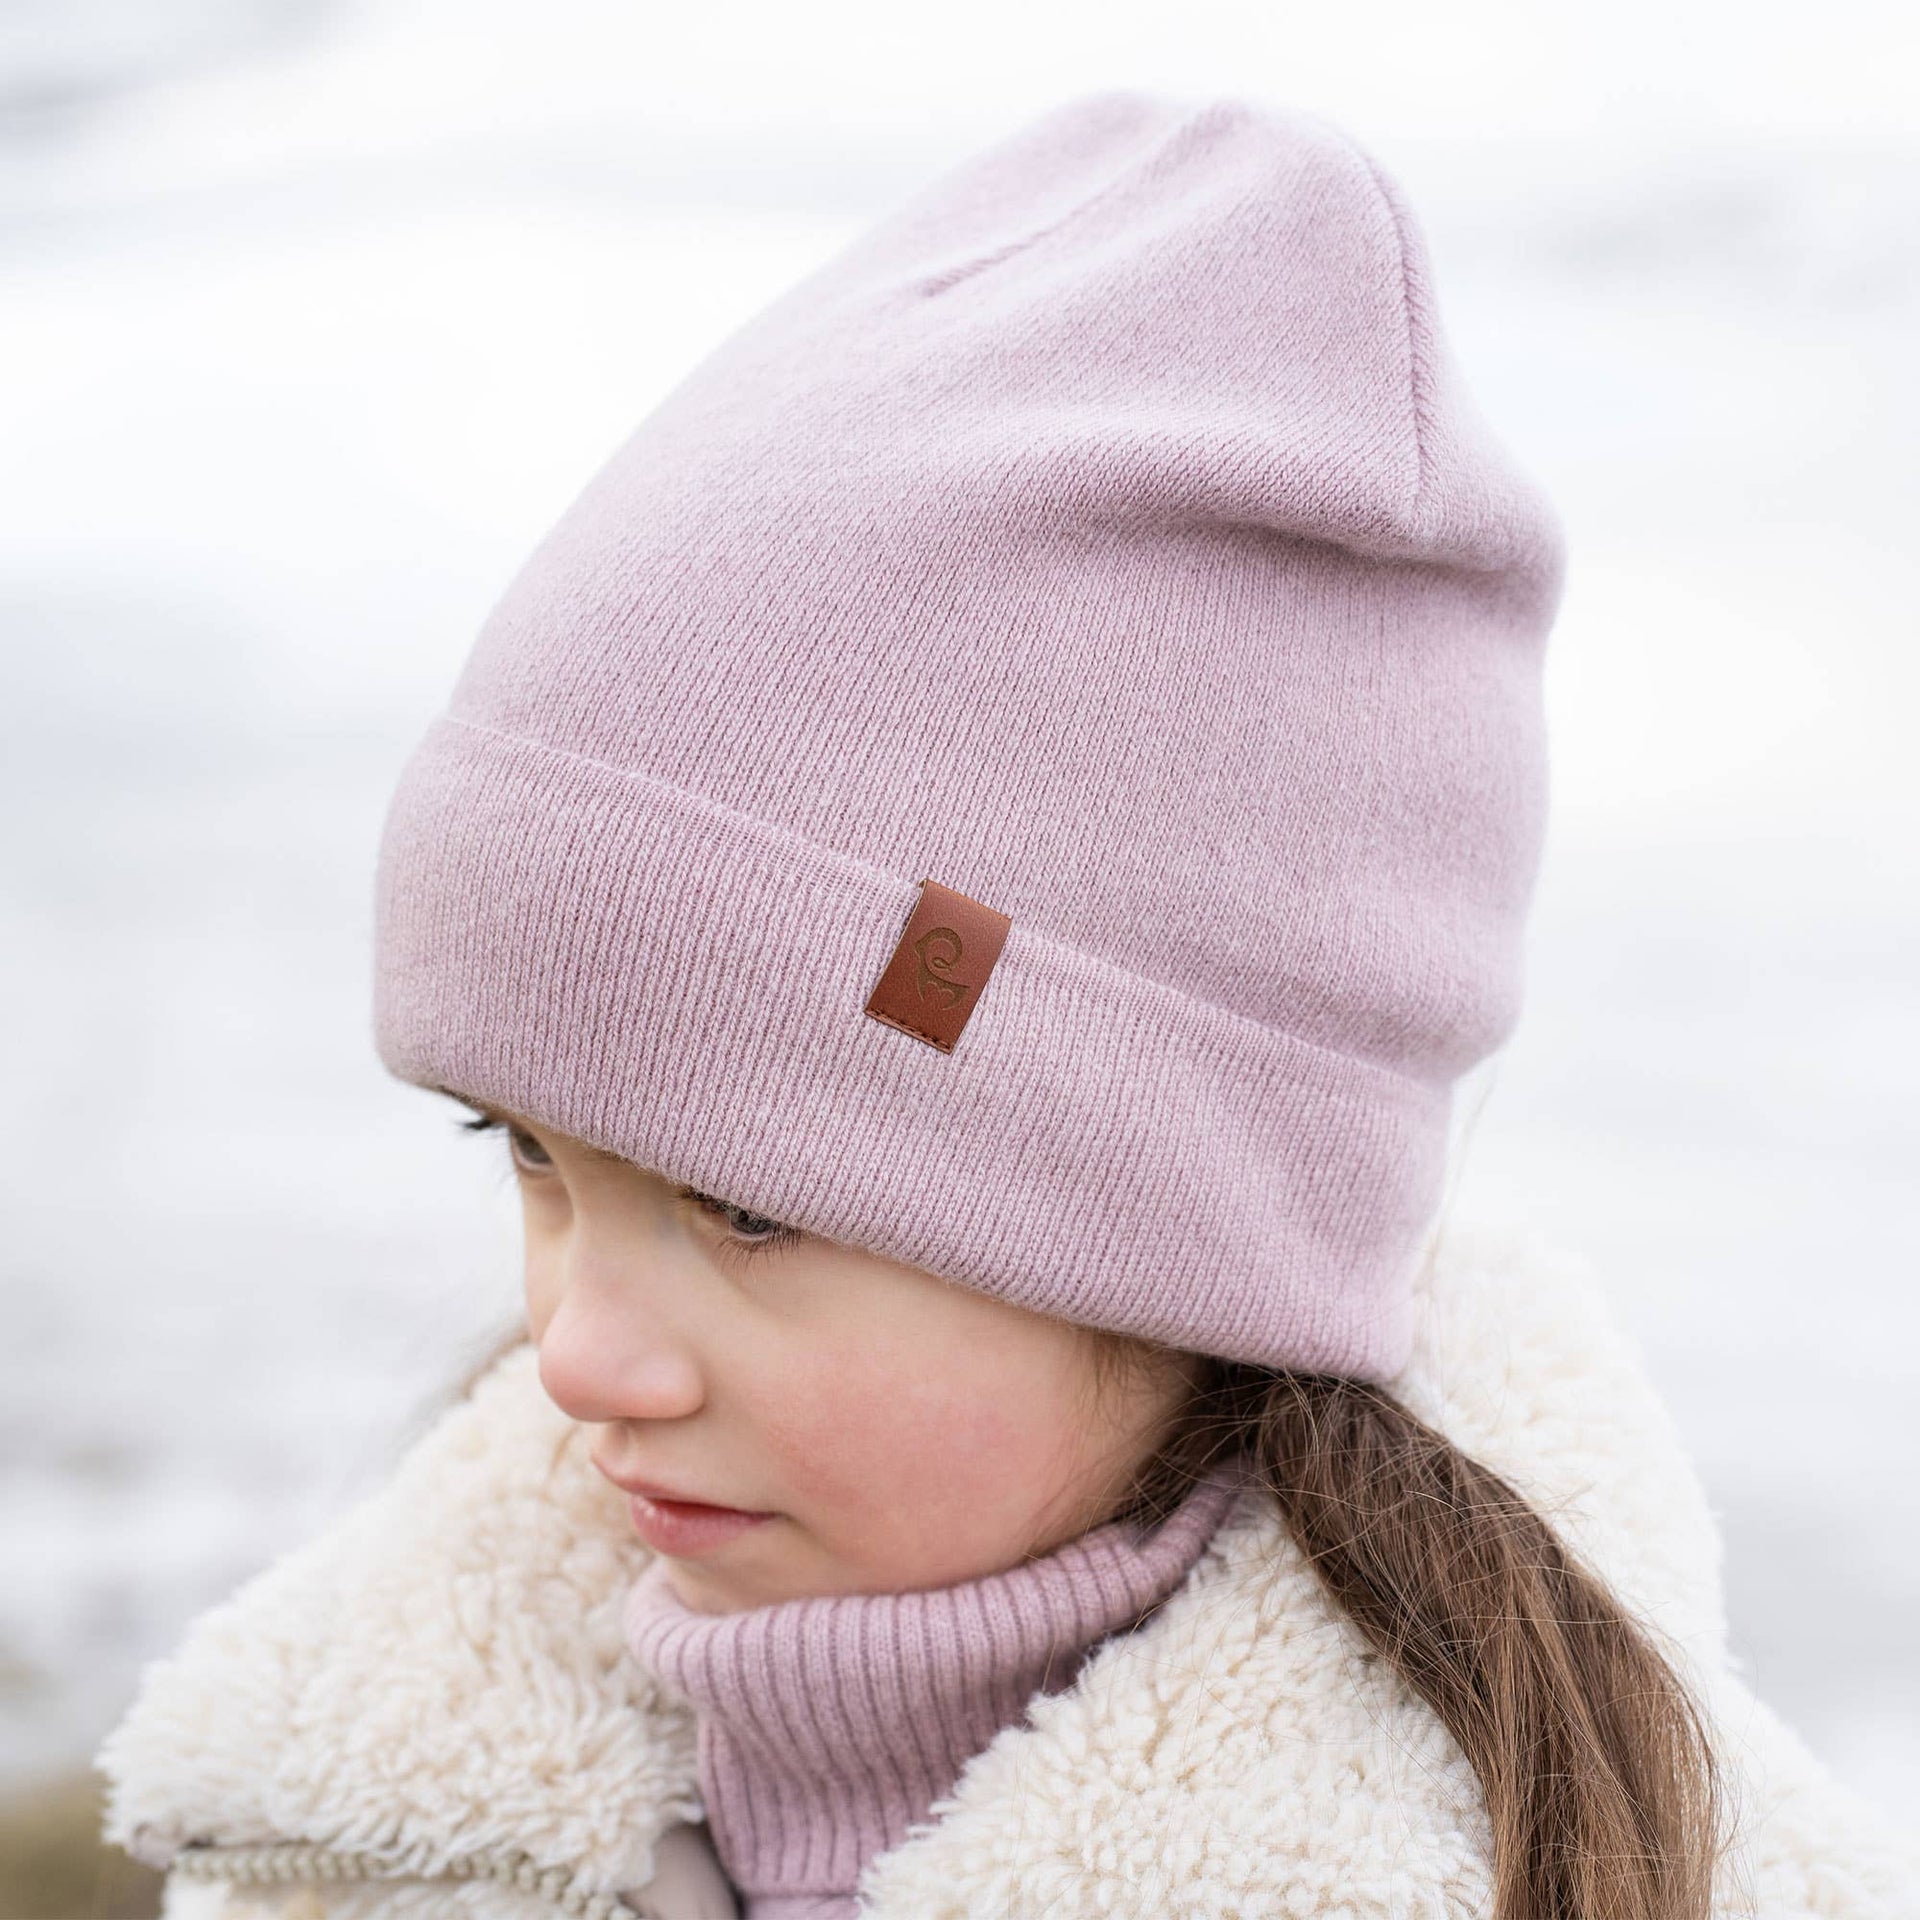 menique - Kids' Beanie Knitted Merino & Cashmere: 3-10 years / Dusty pink